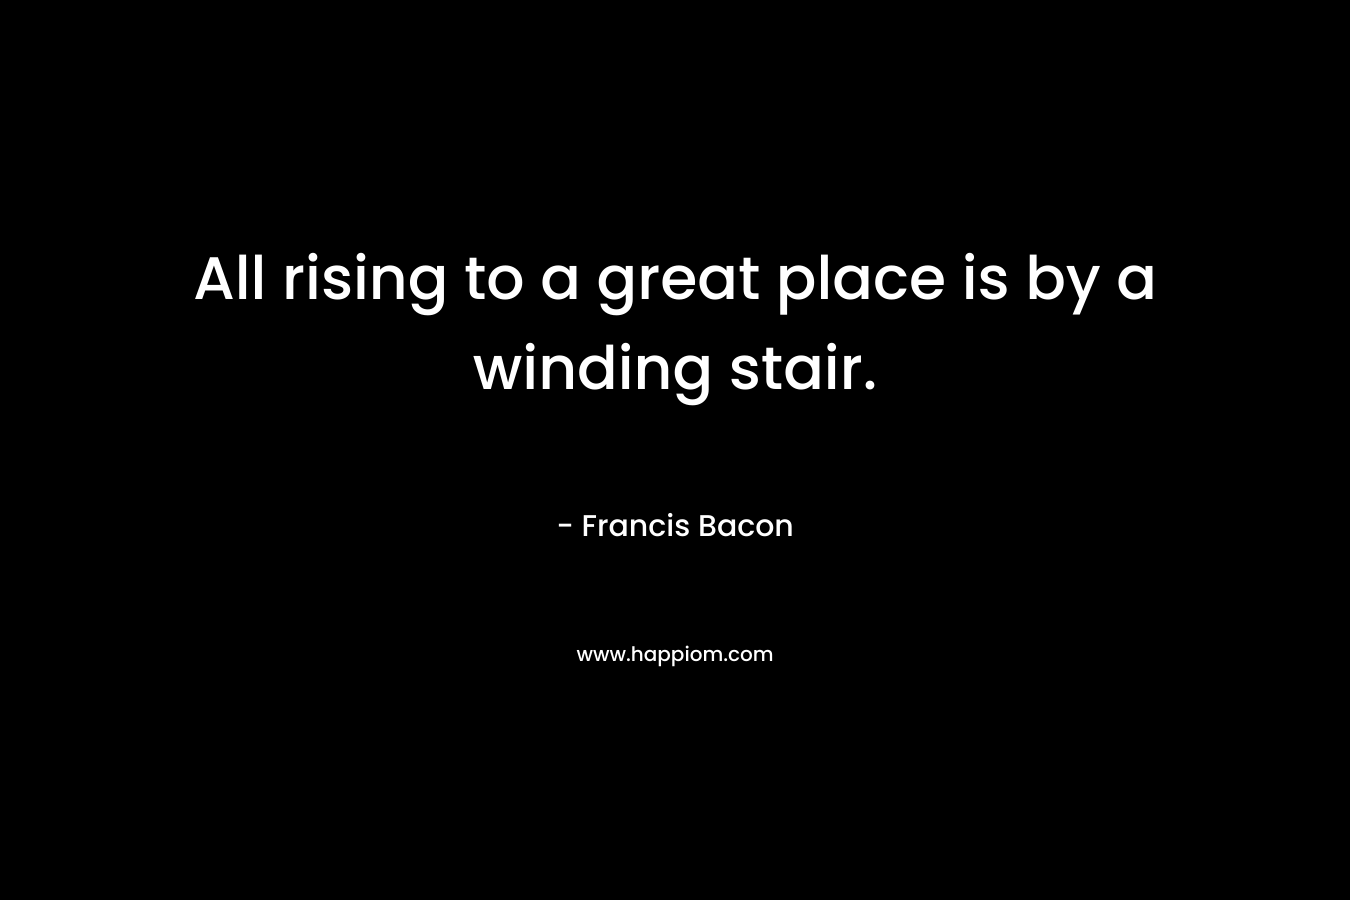 All rising to a great place is by a winding stair. – Francis Bacon